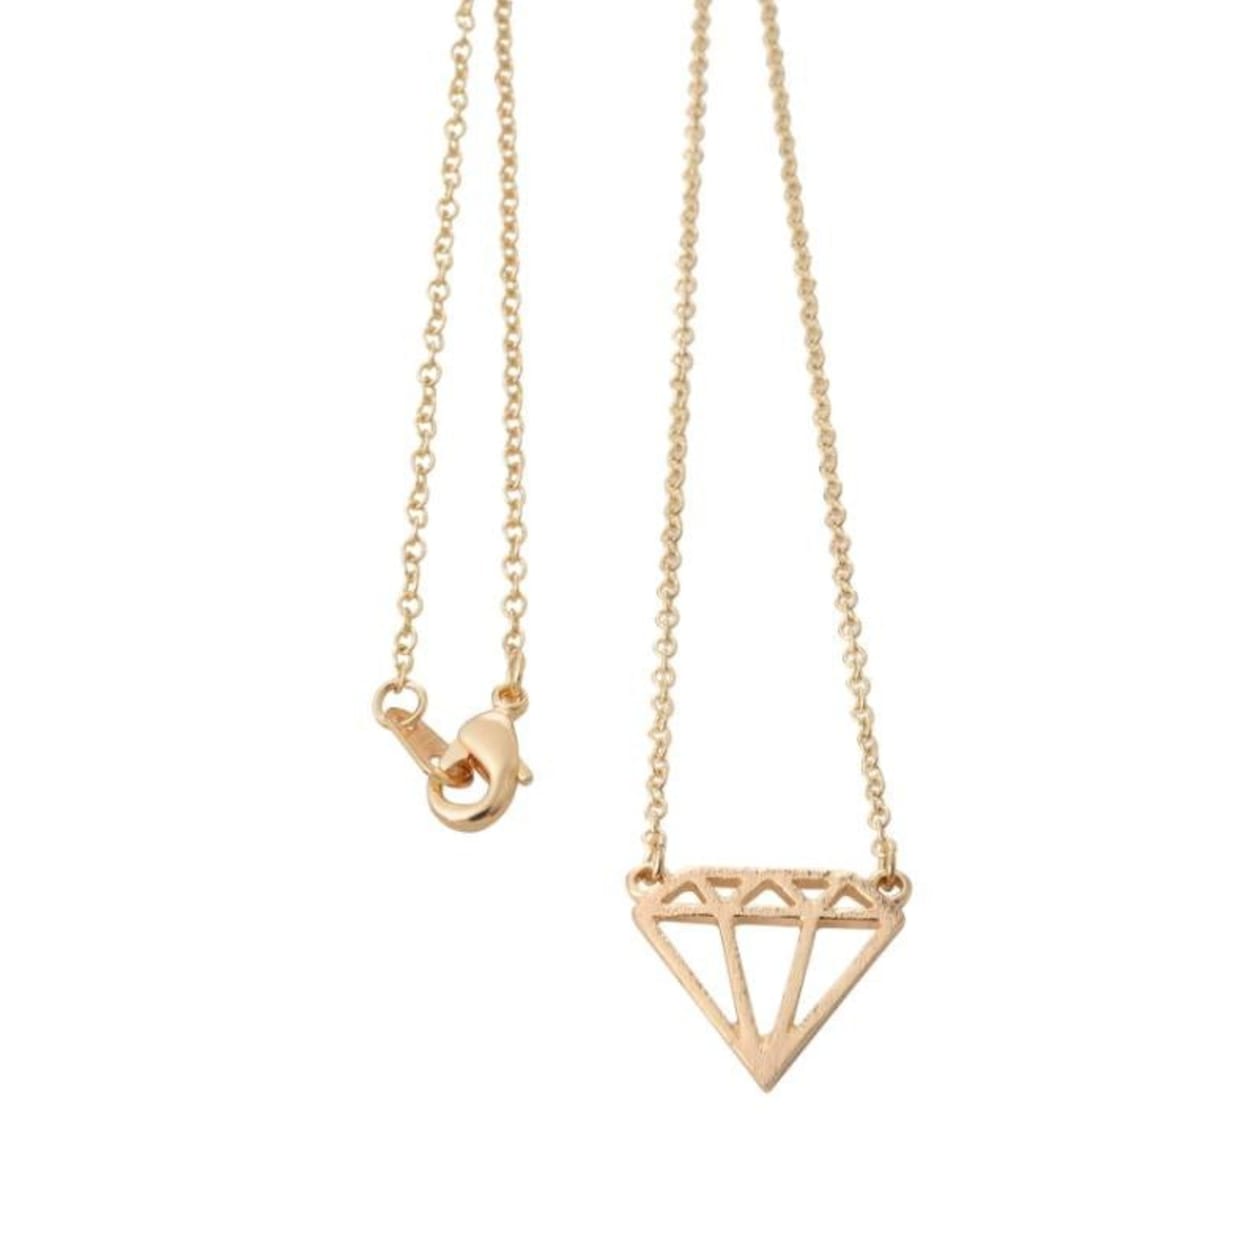 You're a Gem Necklace in Gold Openwork - Color: Gold